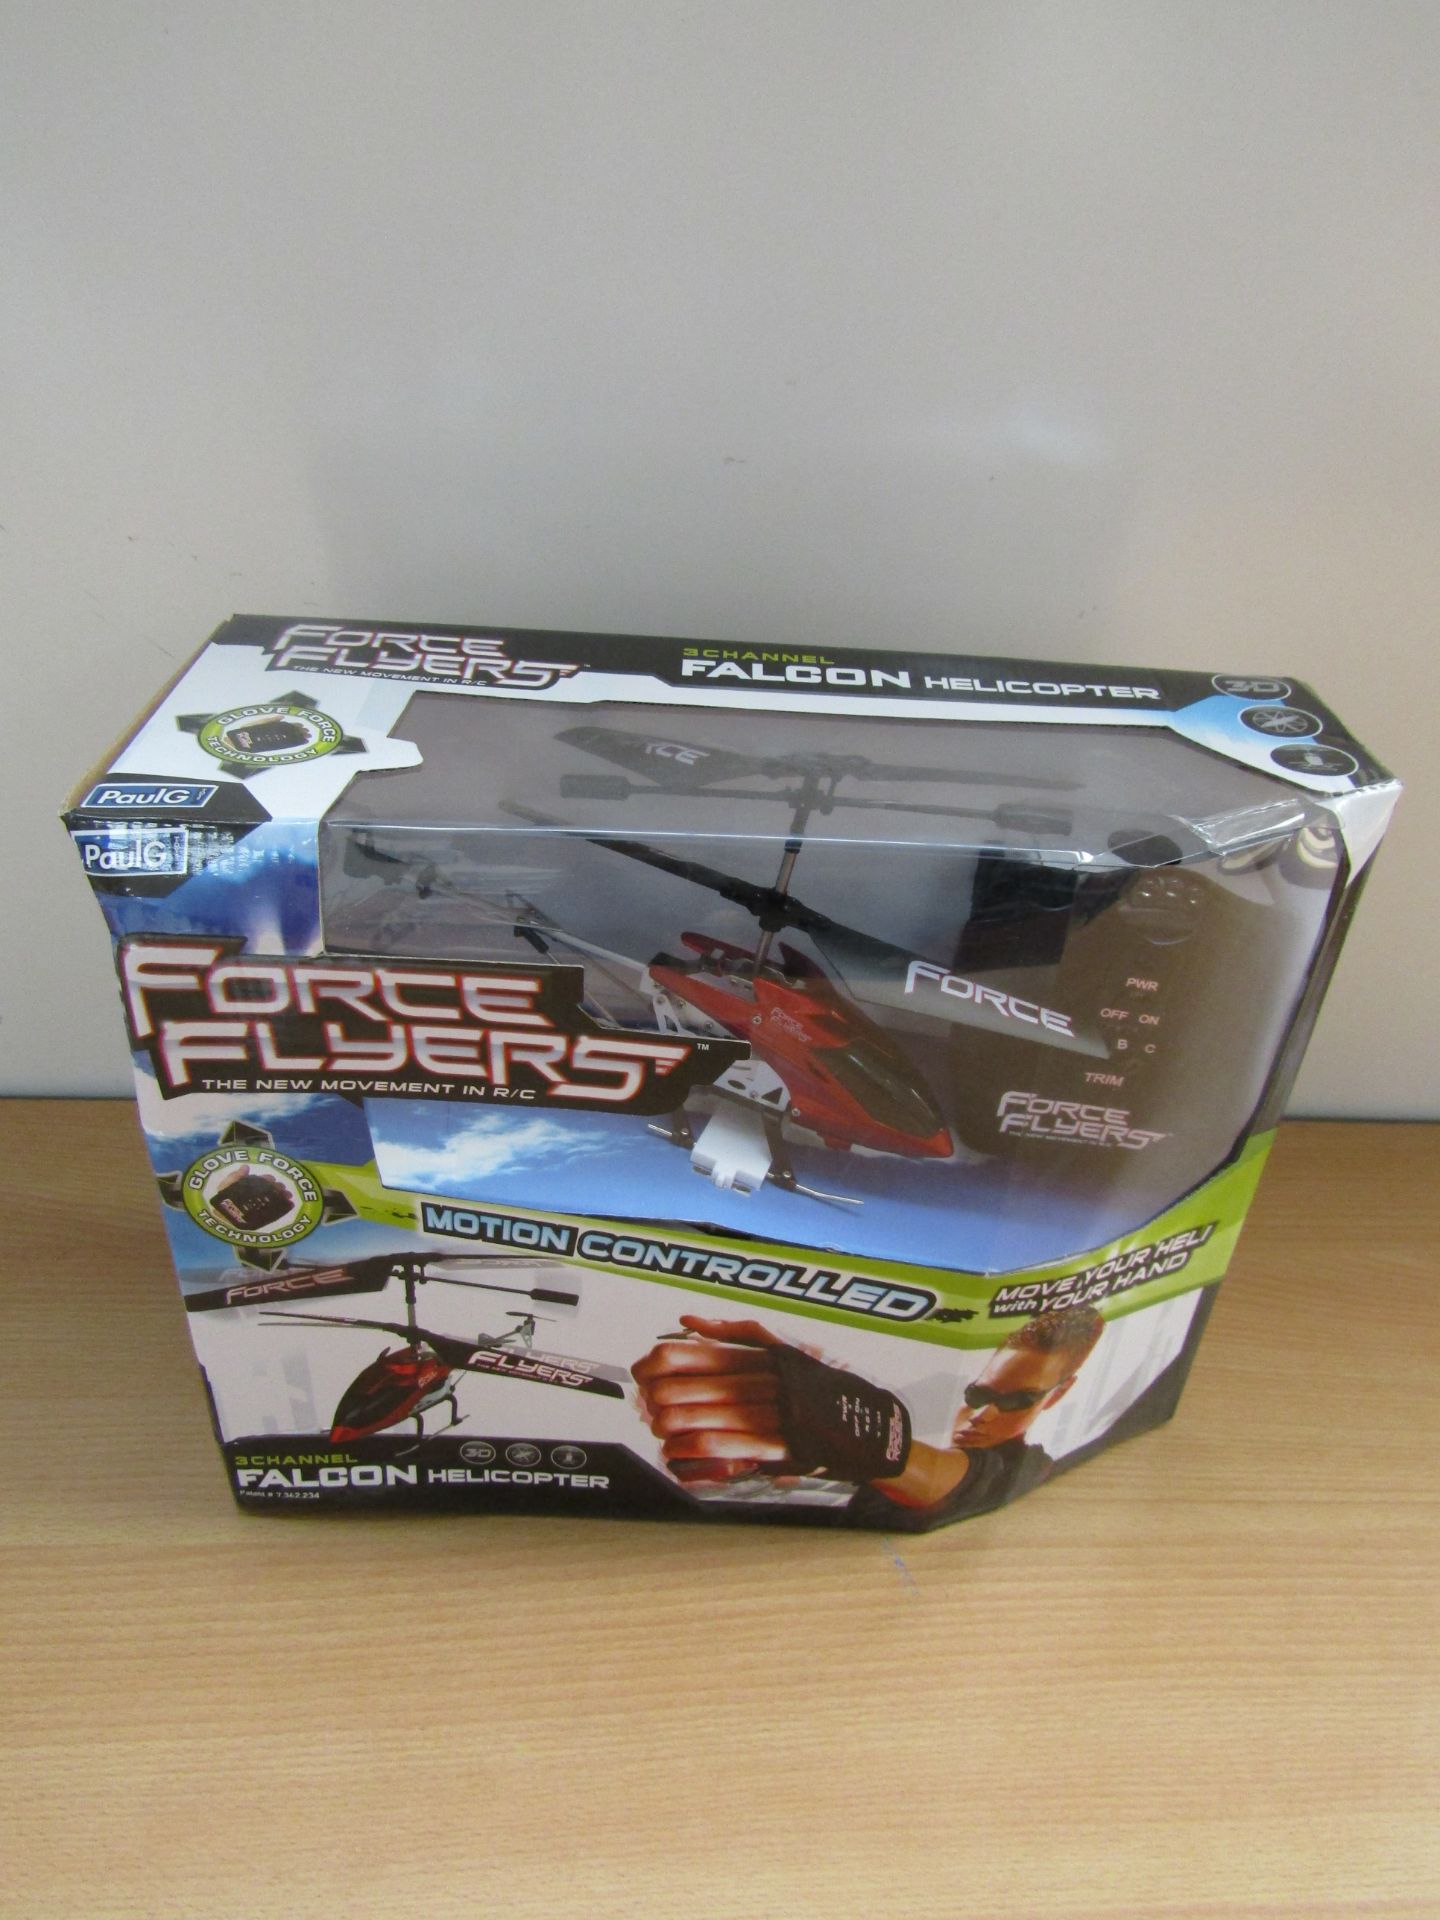 Paul G Force Flyers, Motion Controlled Helicopter, Helicopter looks to be unused and still